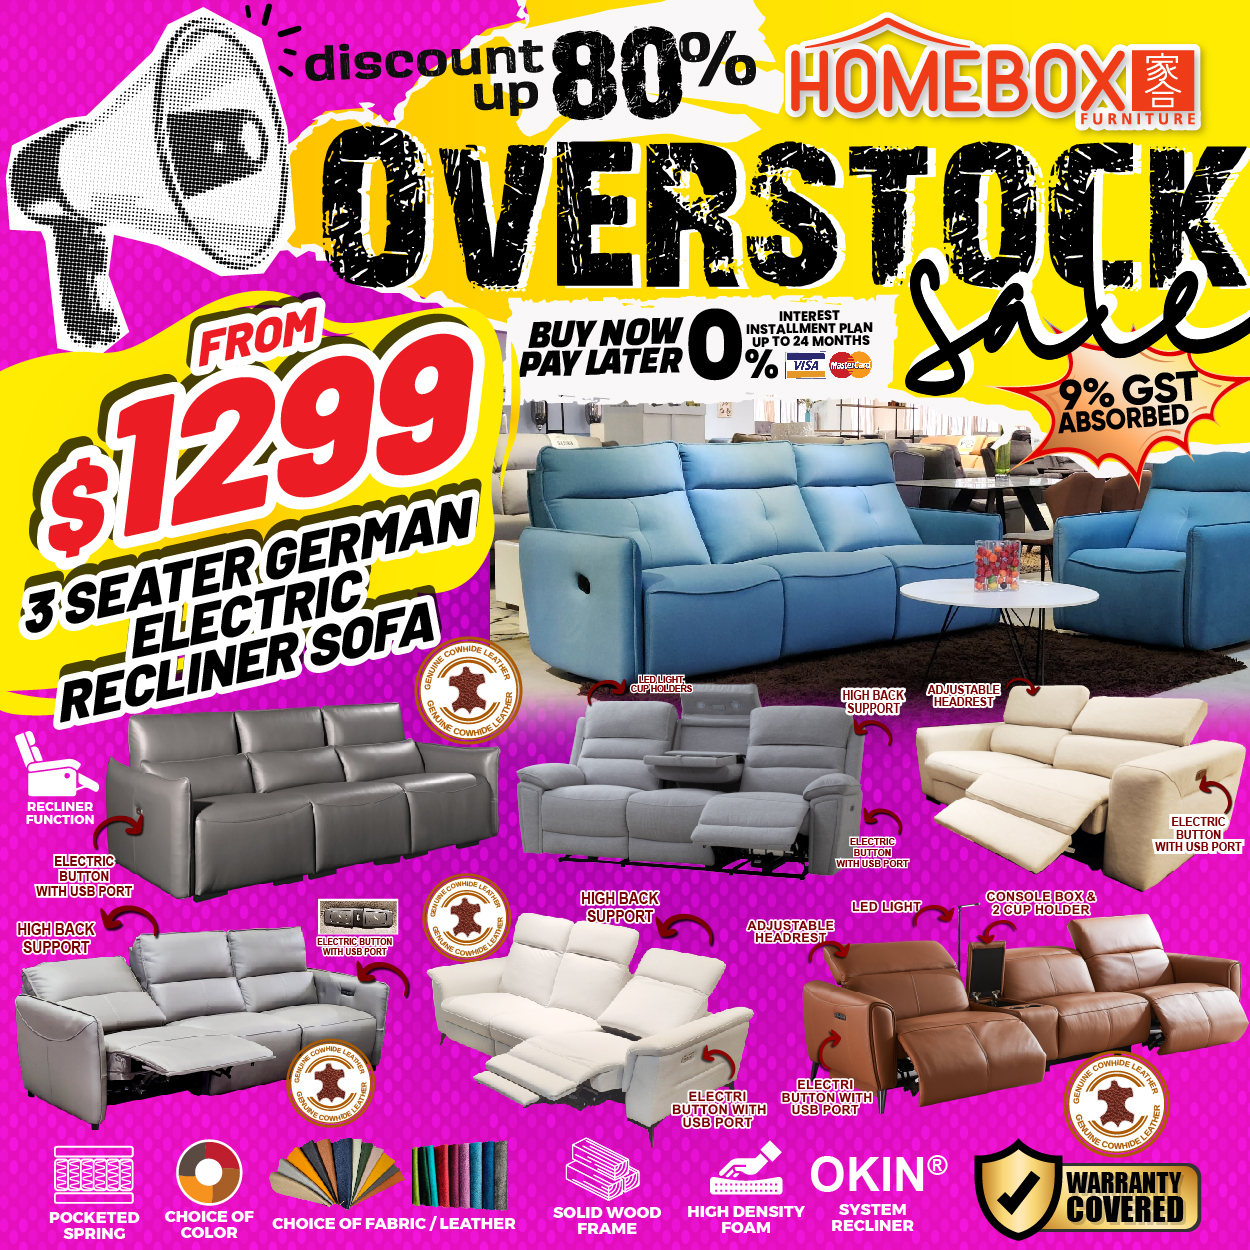 Lobang: Overstock sale at HOMEBOX Furniture @ Aljunied has furniture at up to 80% off from 17 Feb - 3 Mar 24 - 7